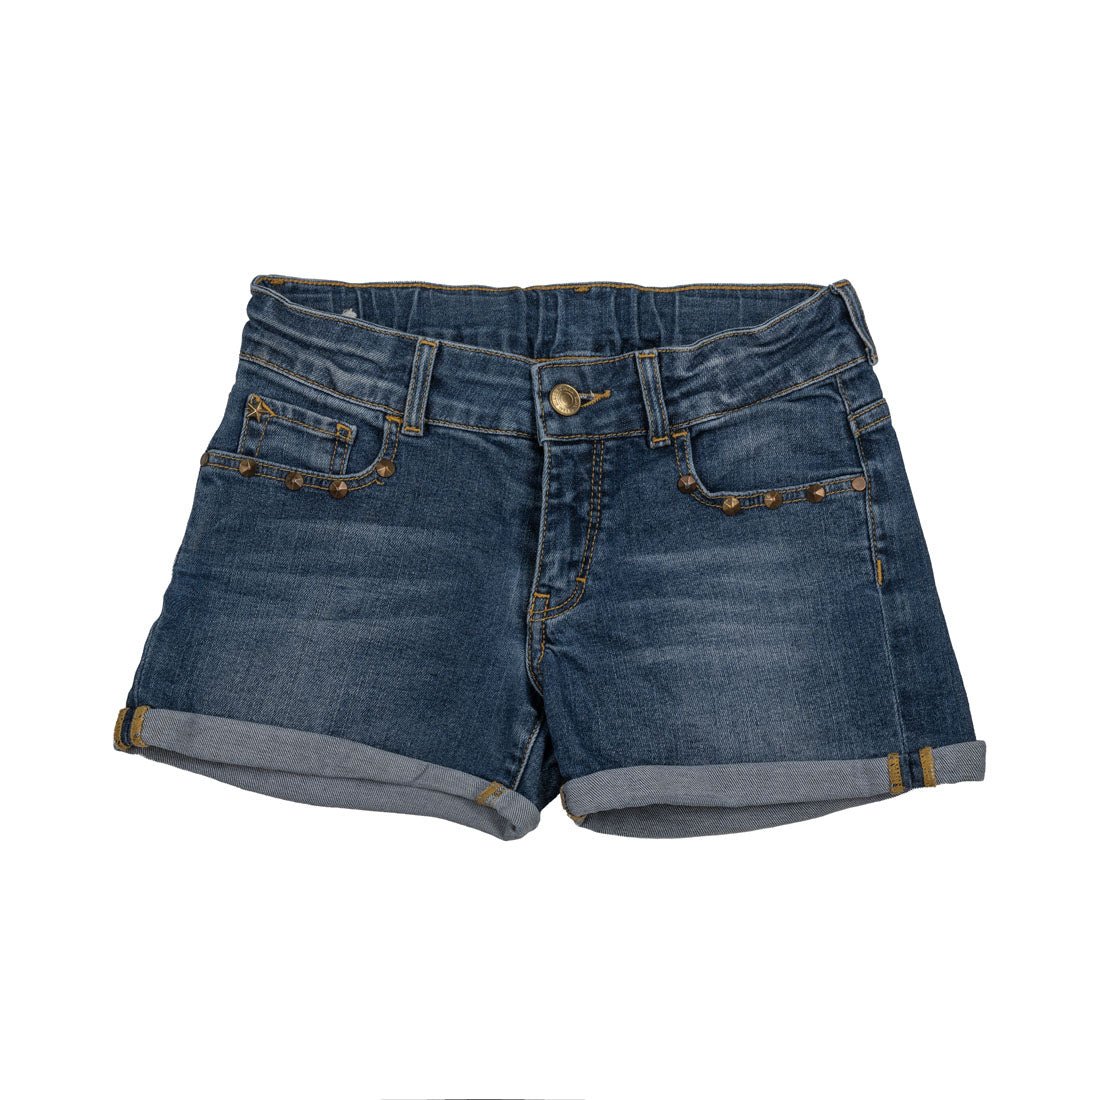 Zara Jeans Shorts For Girls - mymadstore.com